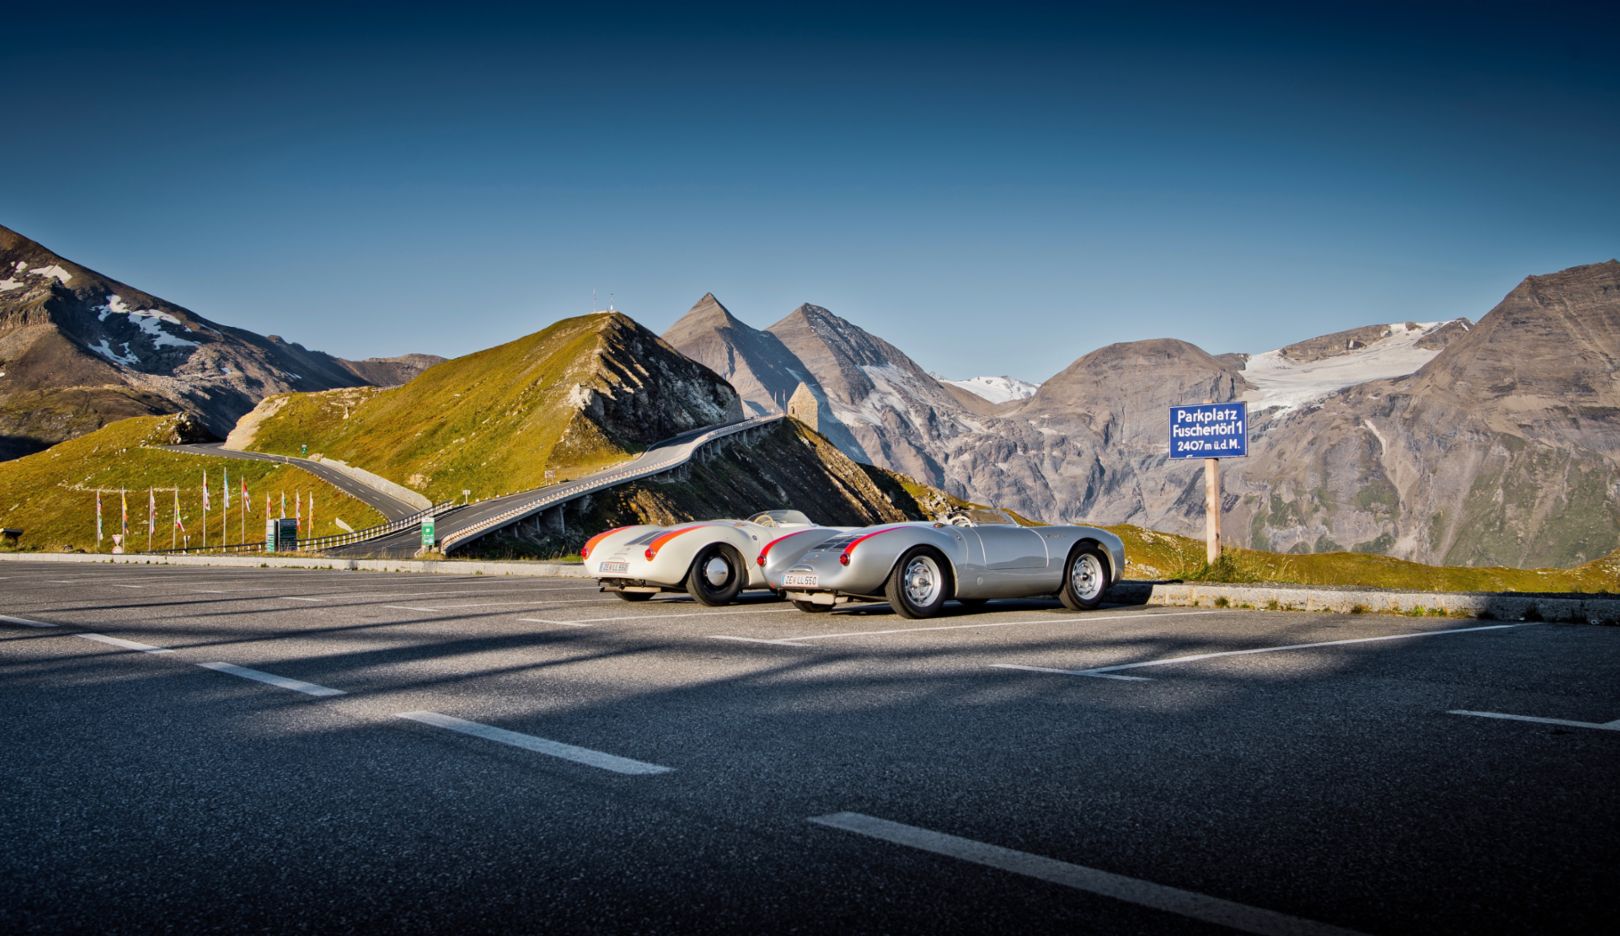 The cul-de-sac at the Fuschertörl branches off to the Edelweißspitze. The two Porsche 550s have already come a long way, but their upwards journey still has about 170 meters to go.